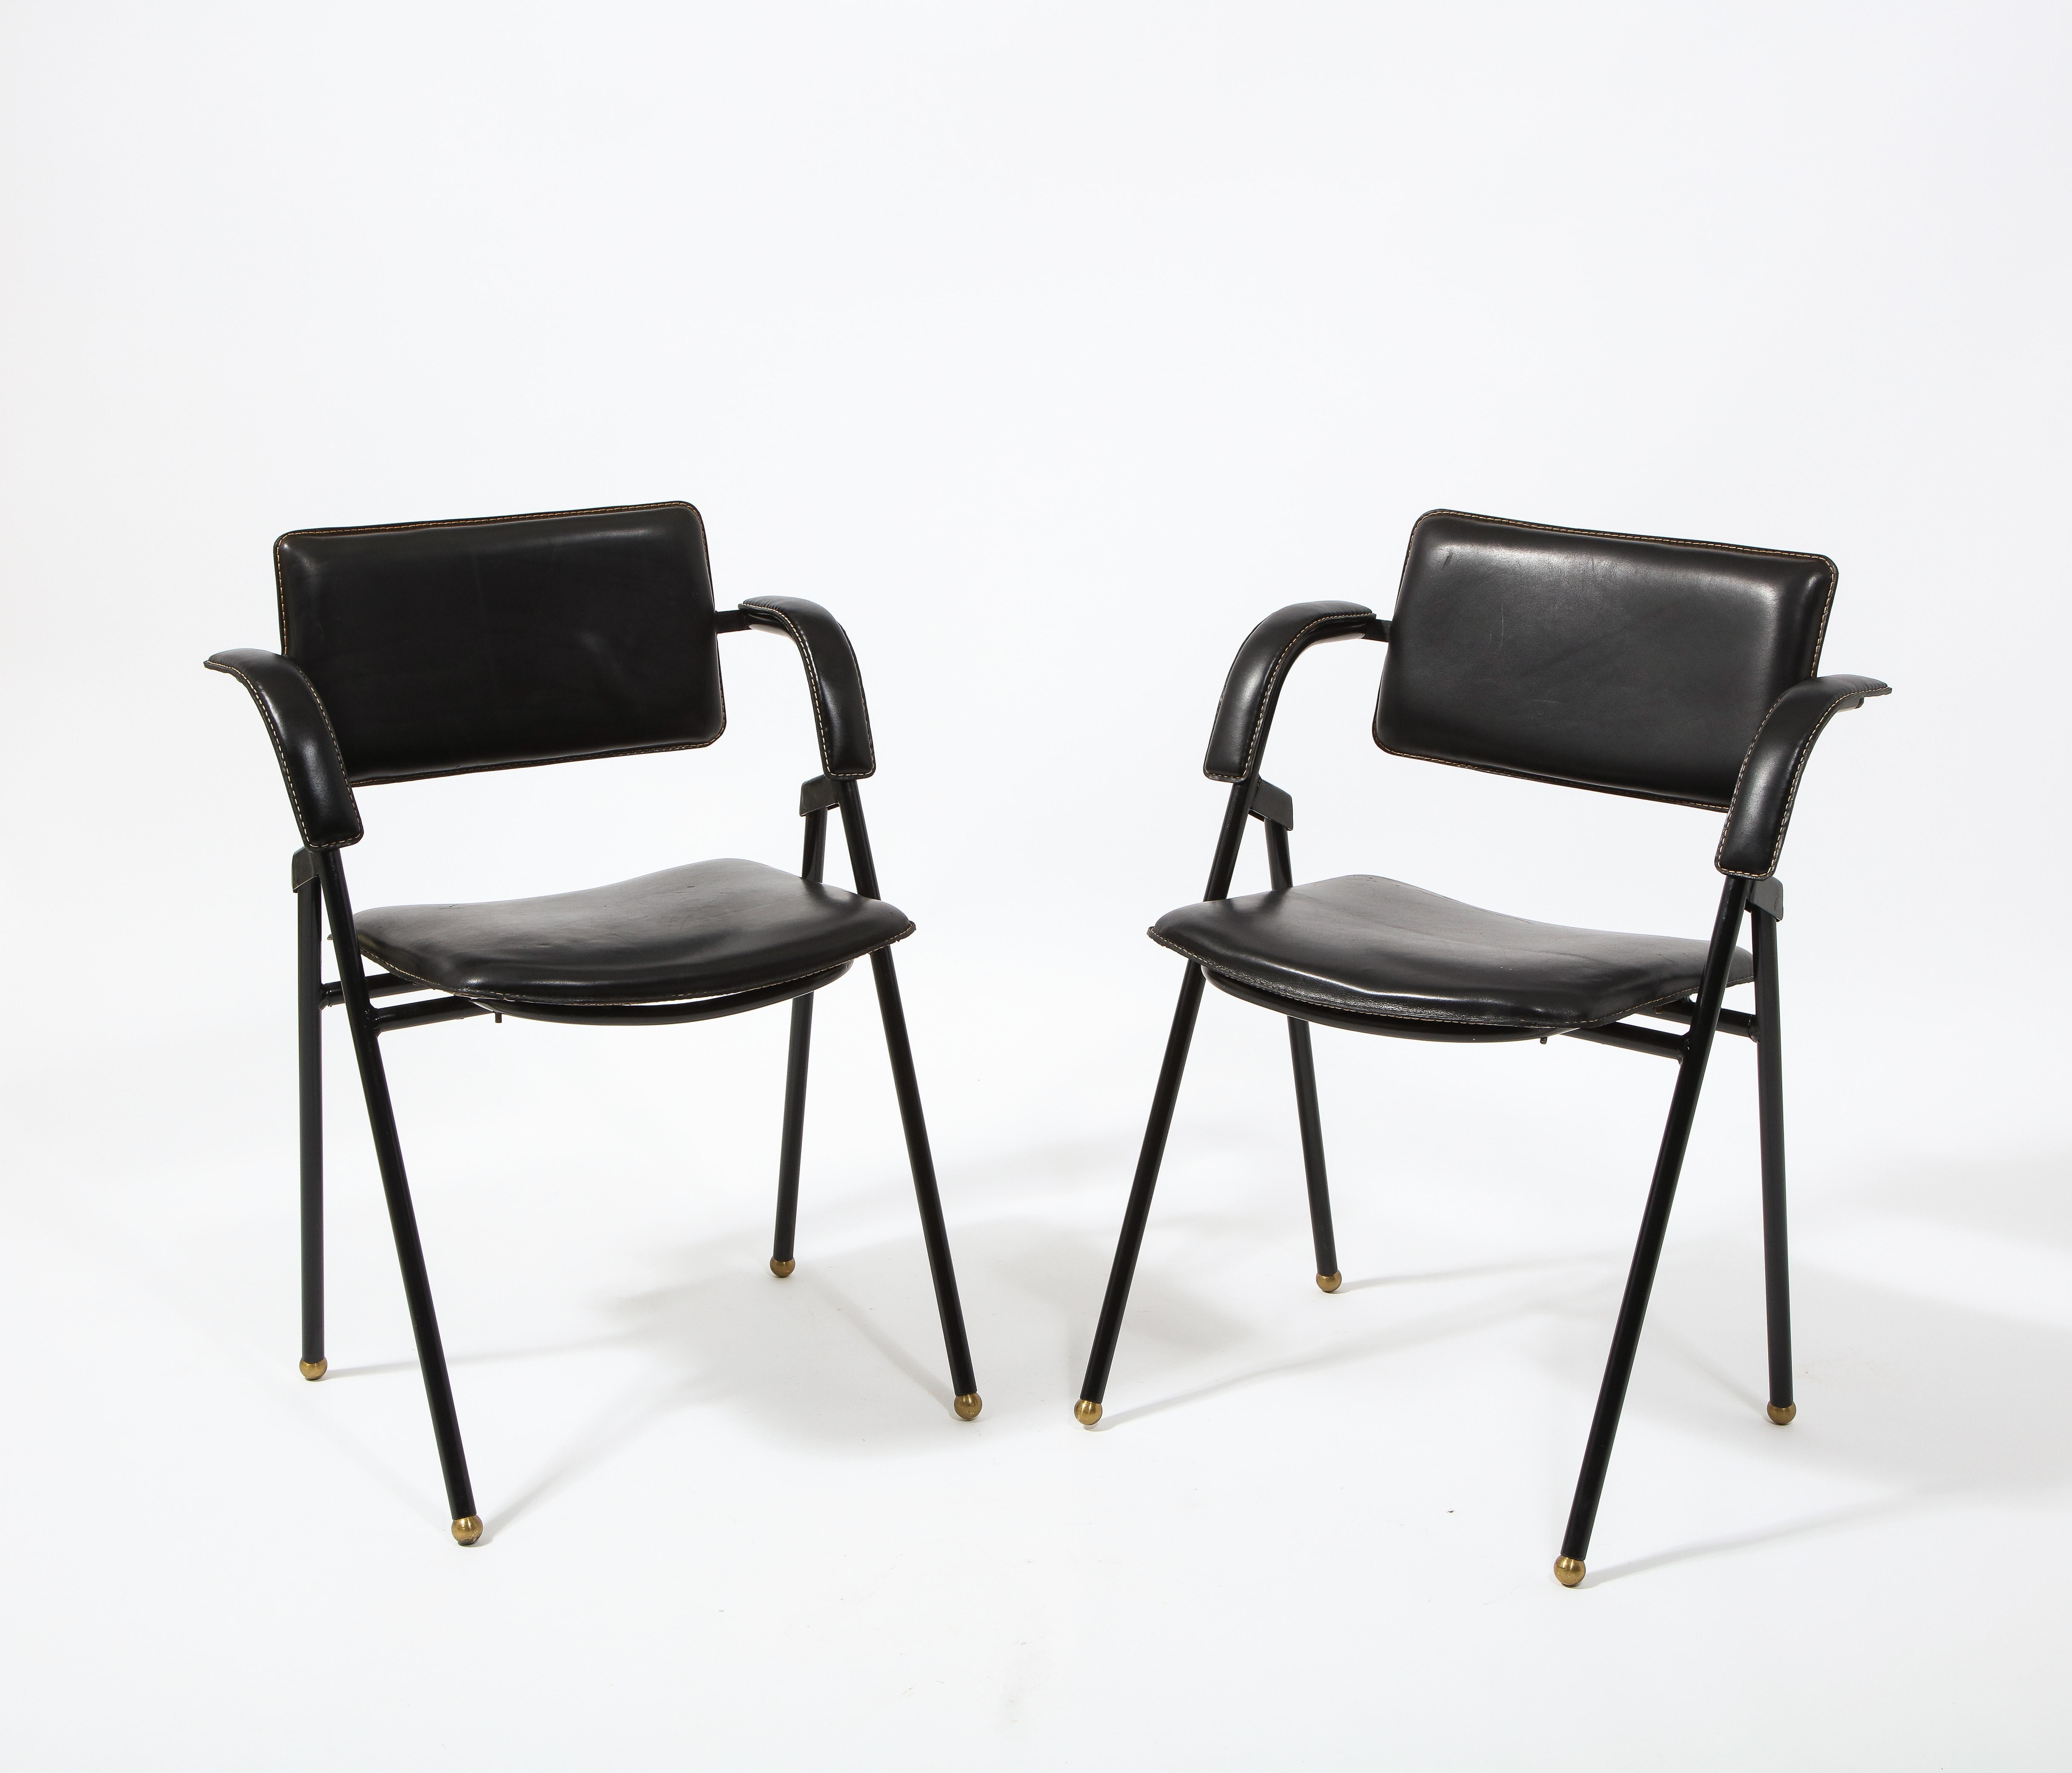 A pair of Jacques Adnet folding chairs in stitched black leather and black enameled frames on brass feet.